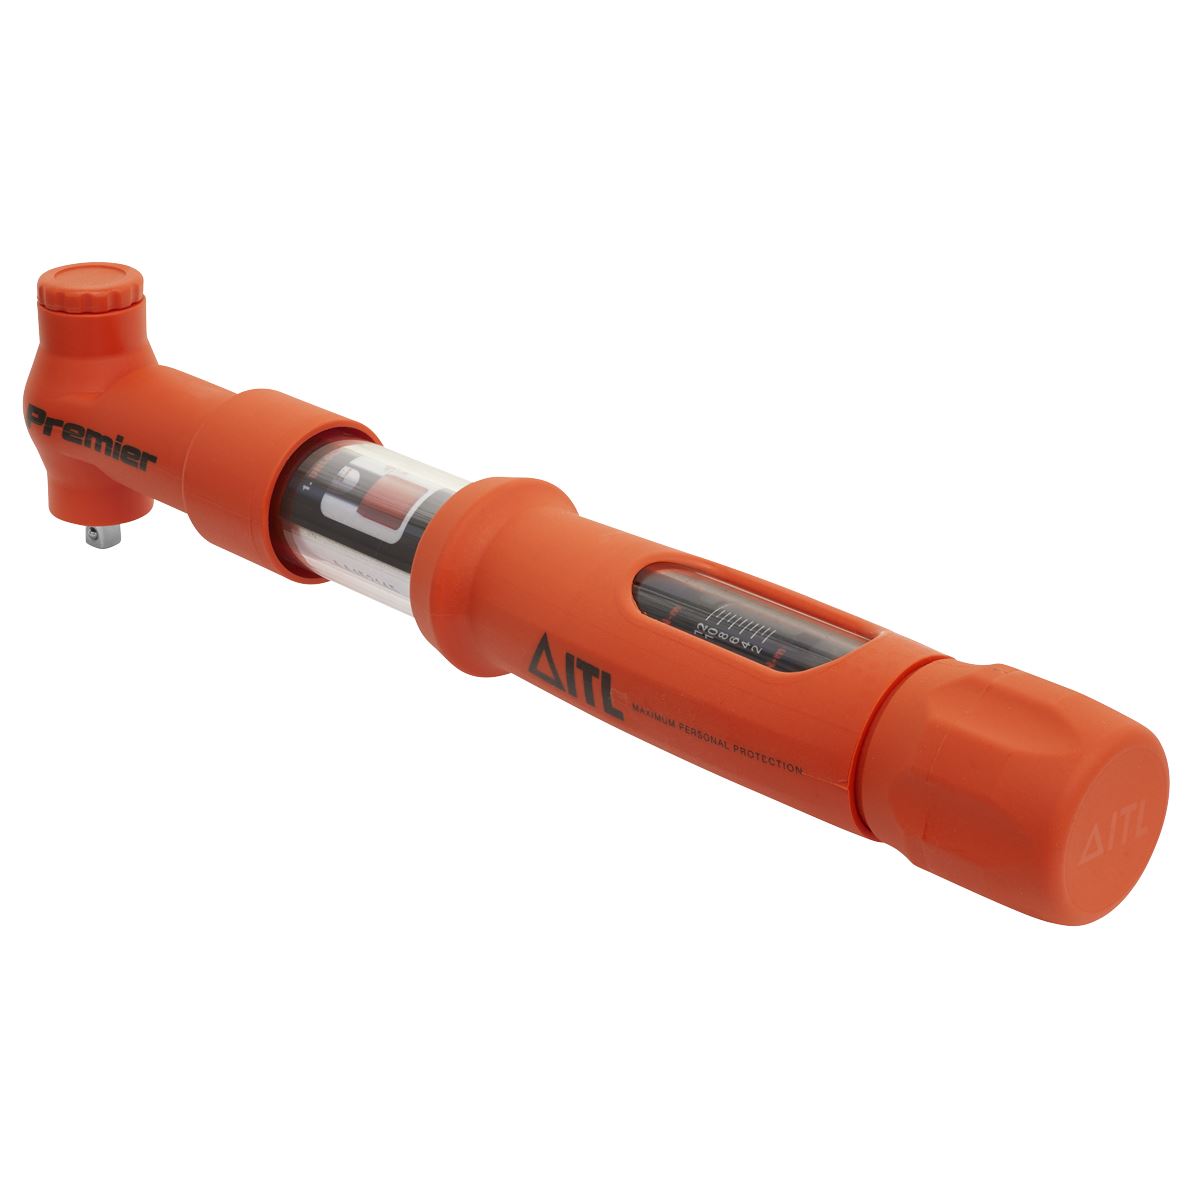 Sealey Premier Torque Wrench Insulated 1/4"Sq Drive 2-12Nm